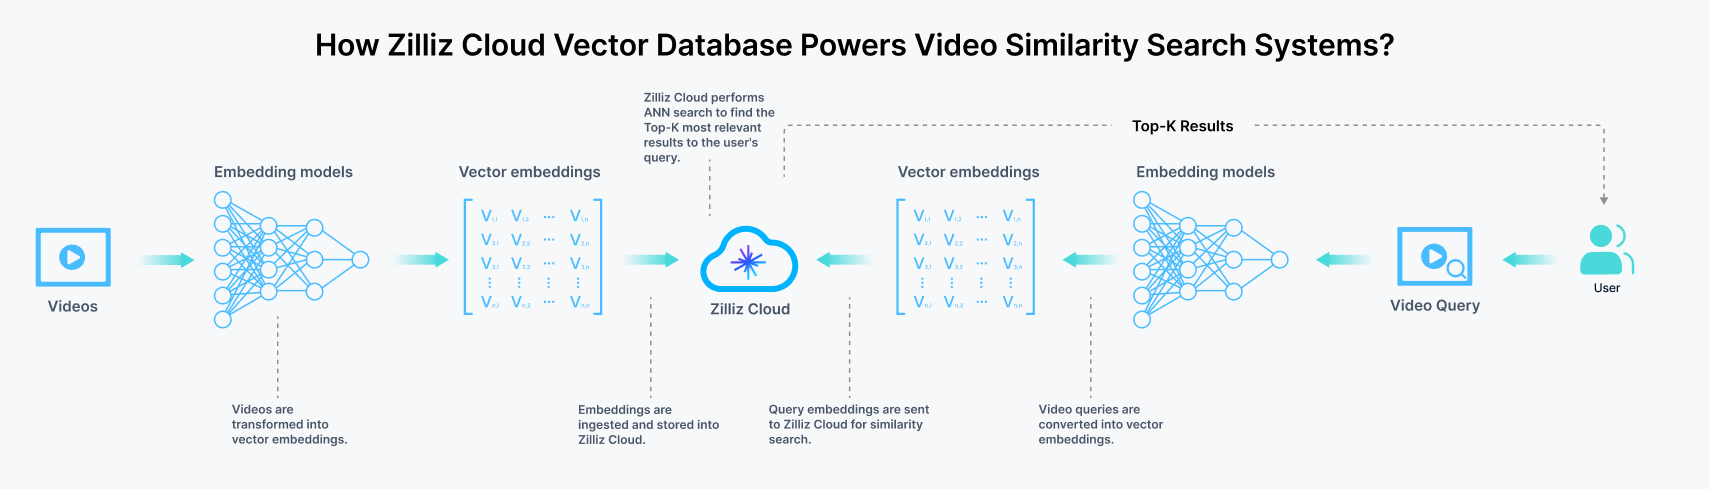 How Zilliz Cloud Powers A Video Similarity Search System